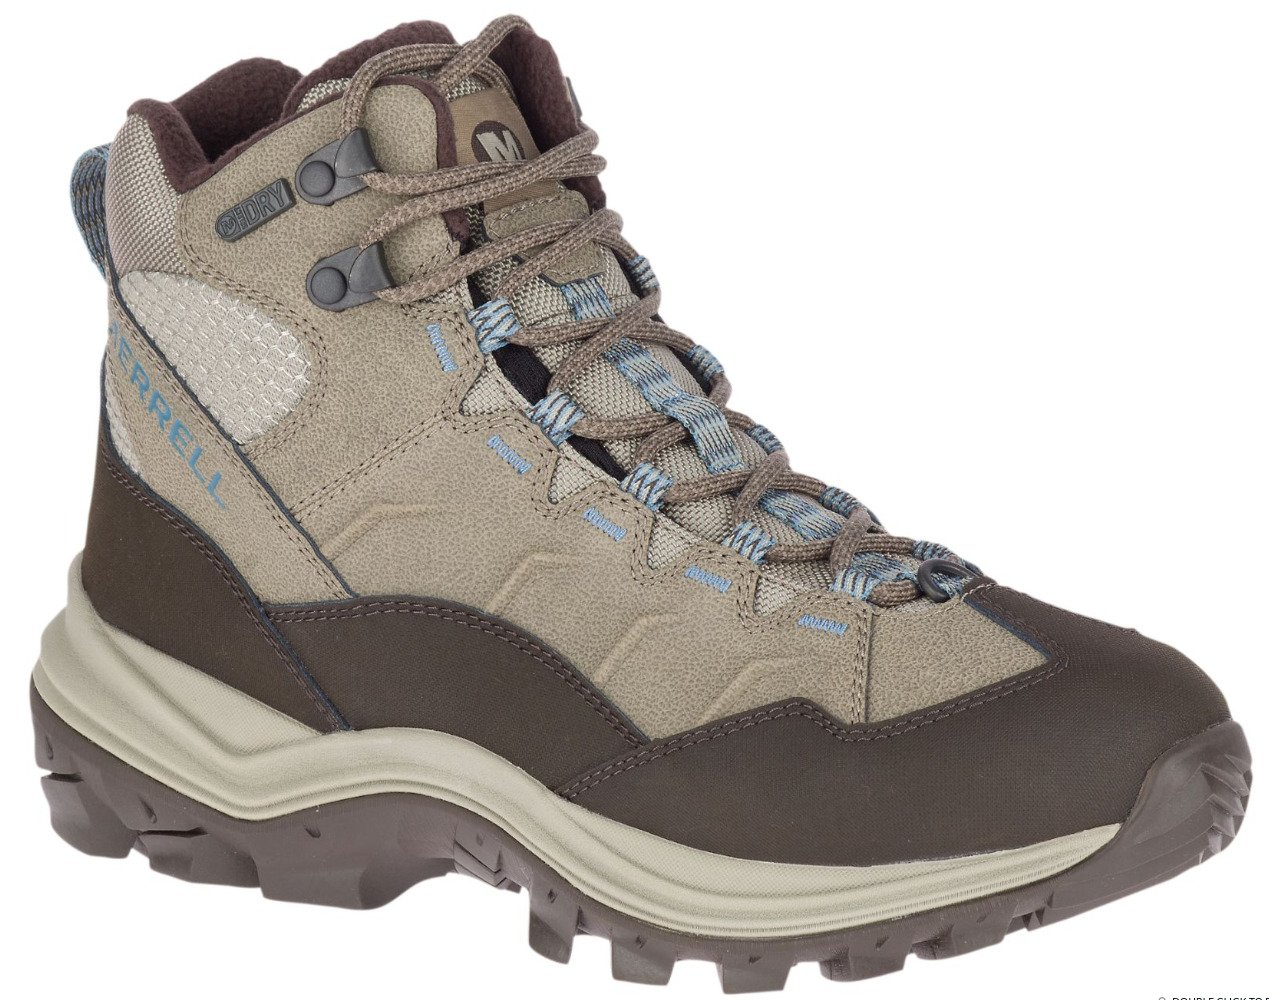 Merrell Thermo Chill boots are the best budget priced men